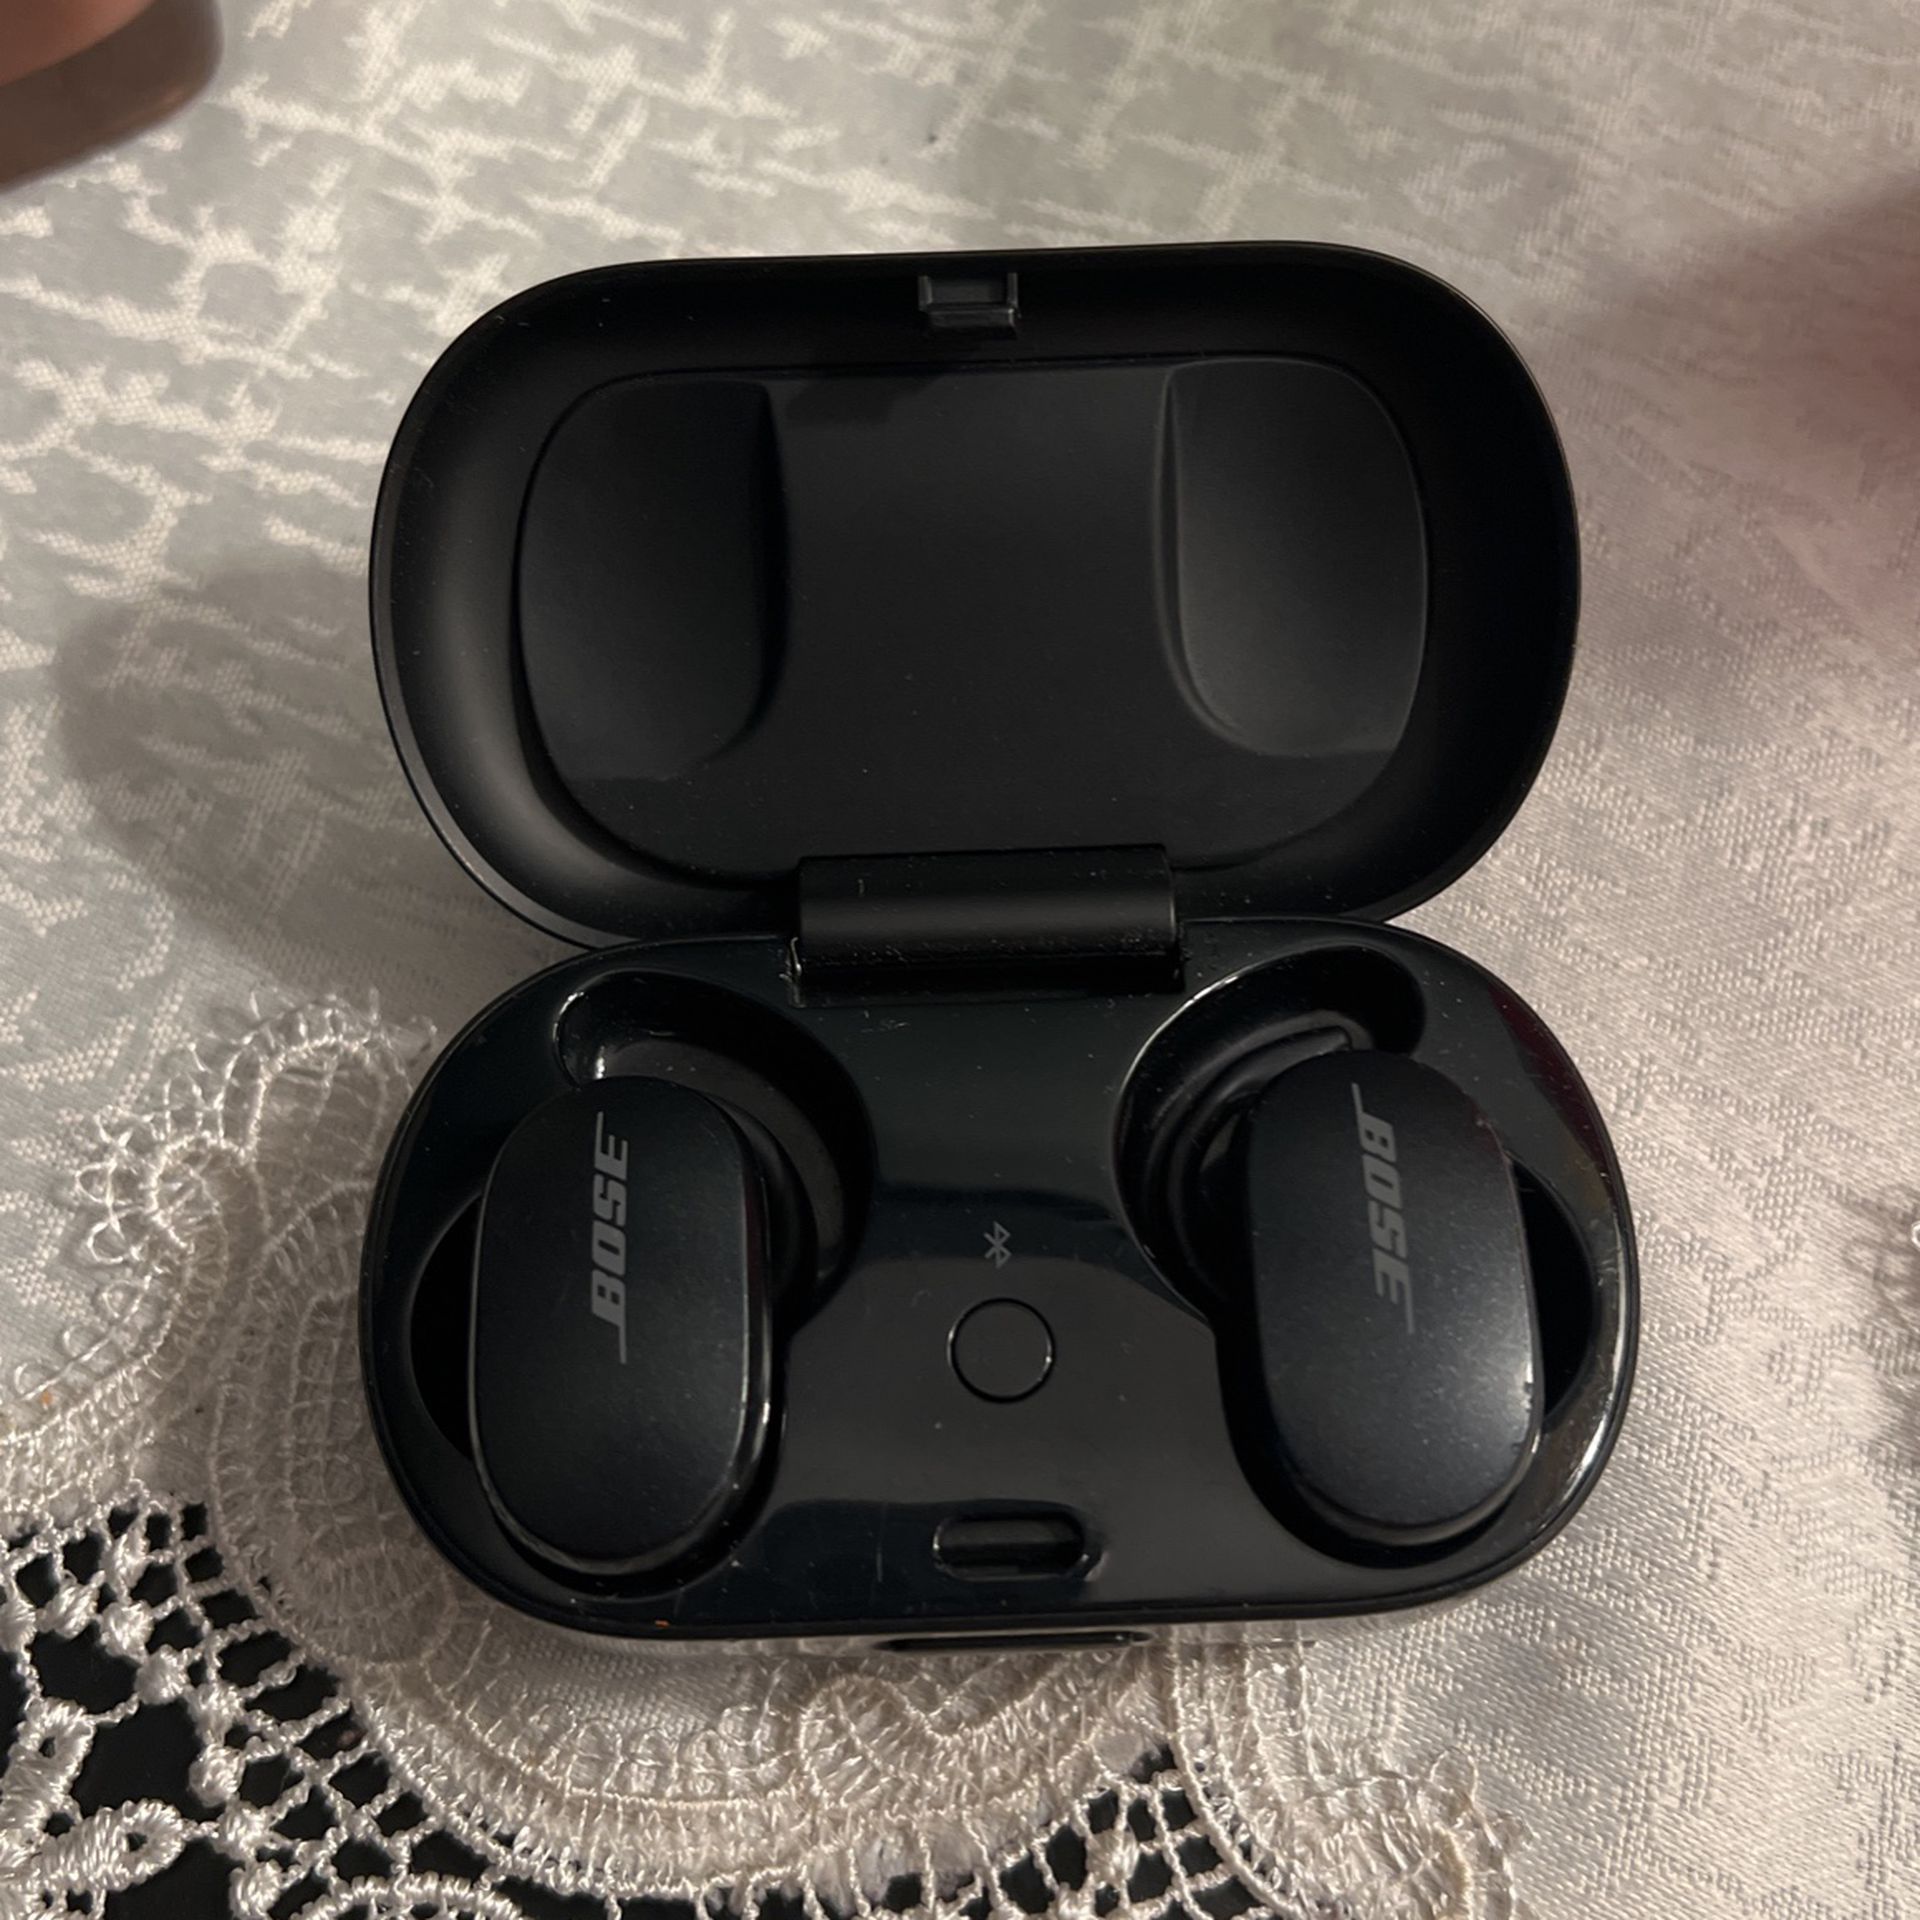 Bose Quitecomfort Noise Canceling Earbuds